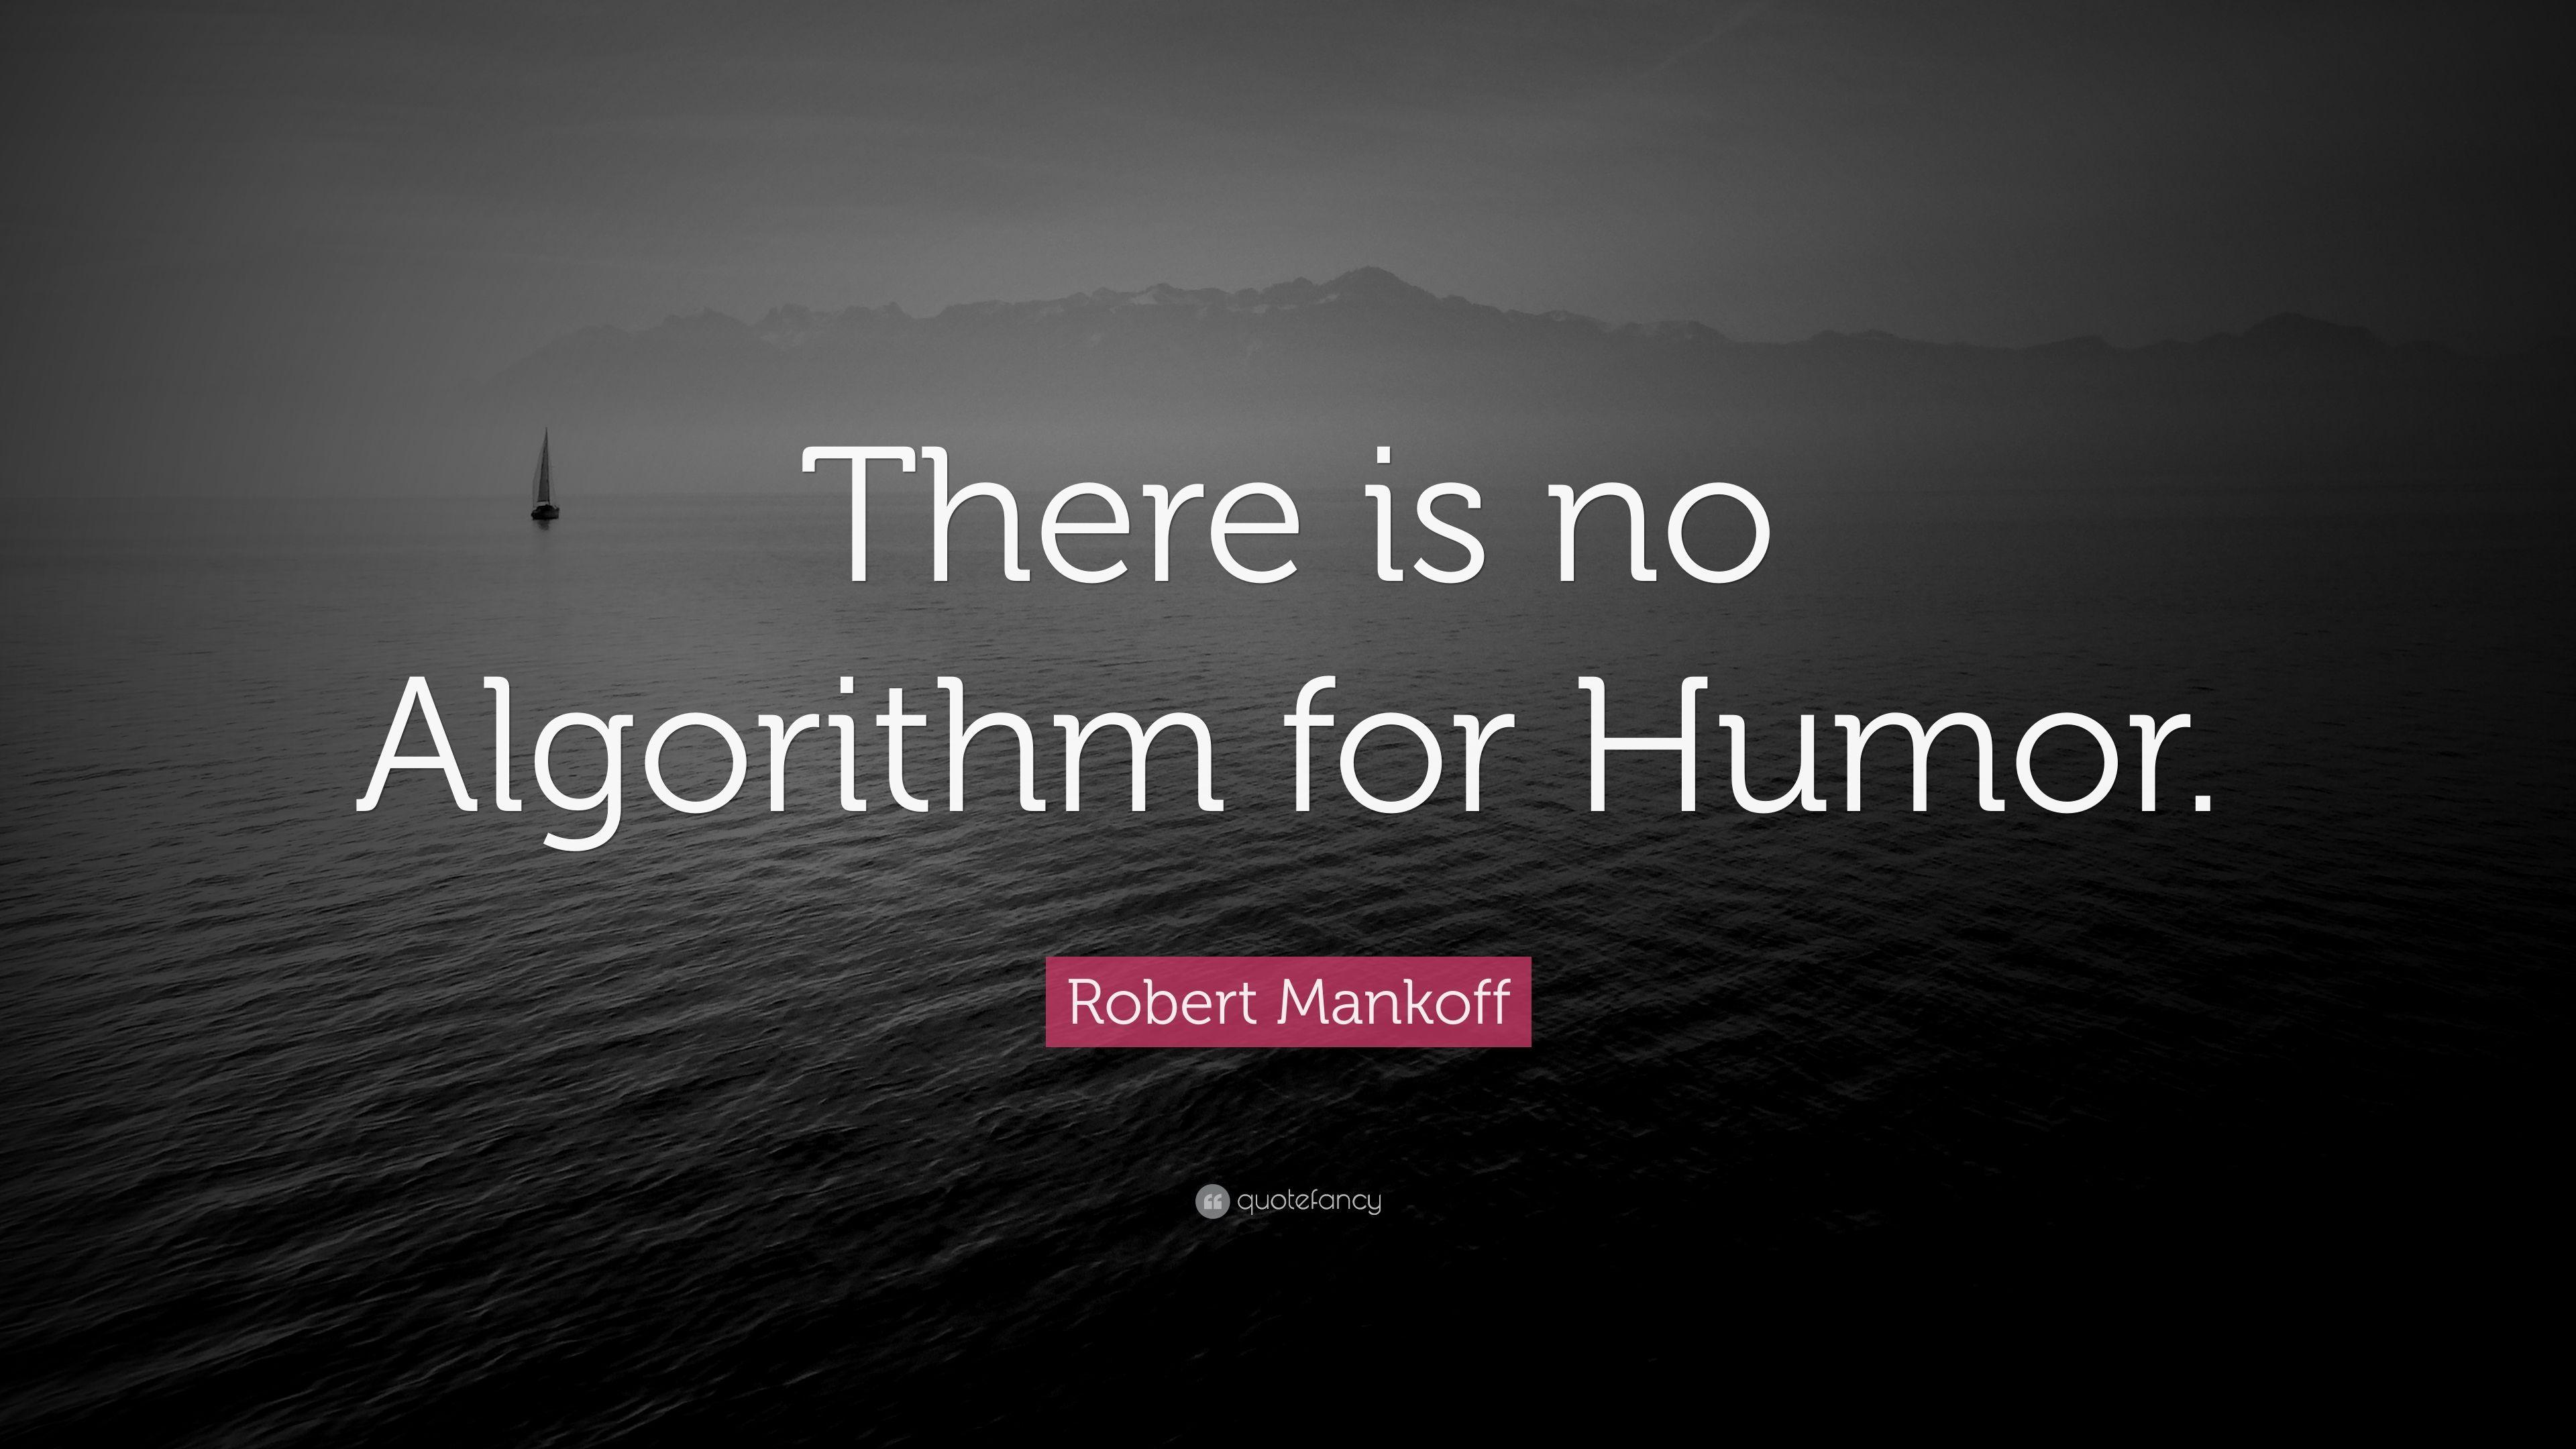 Robert Mankoff Quote: “There is no Algorithm for Humor.” 7